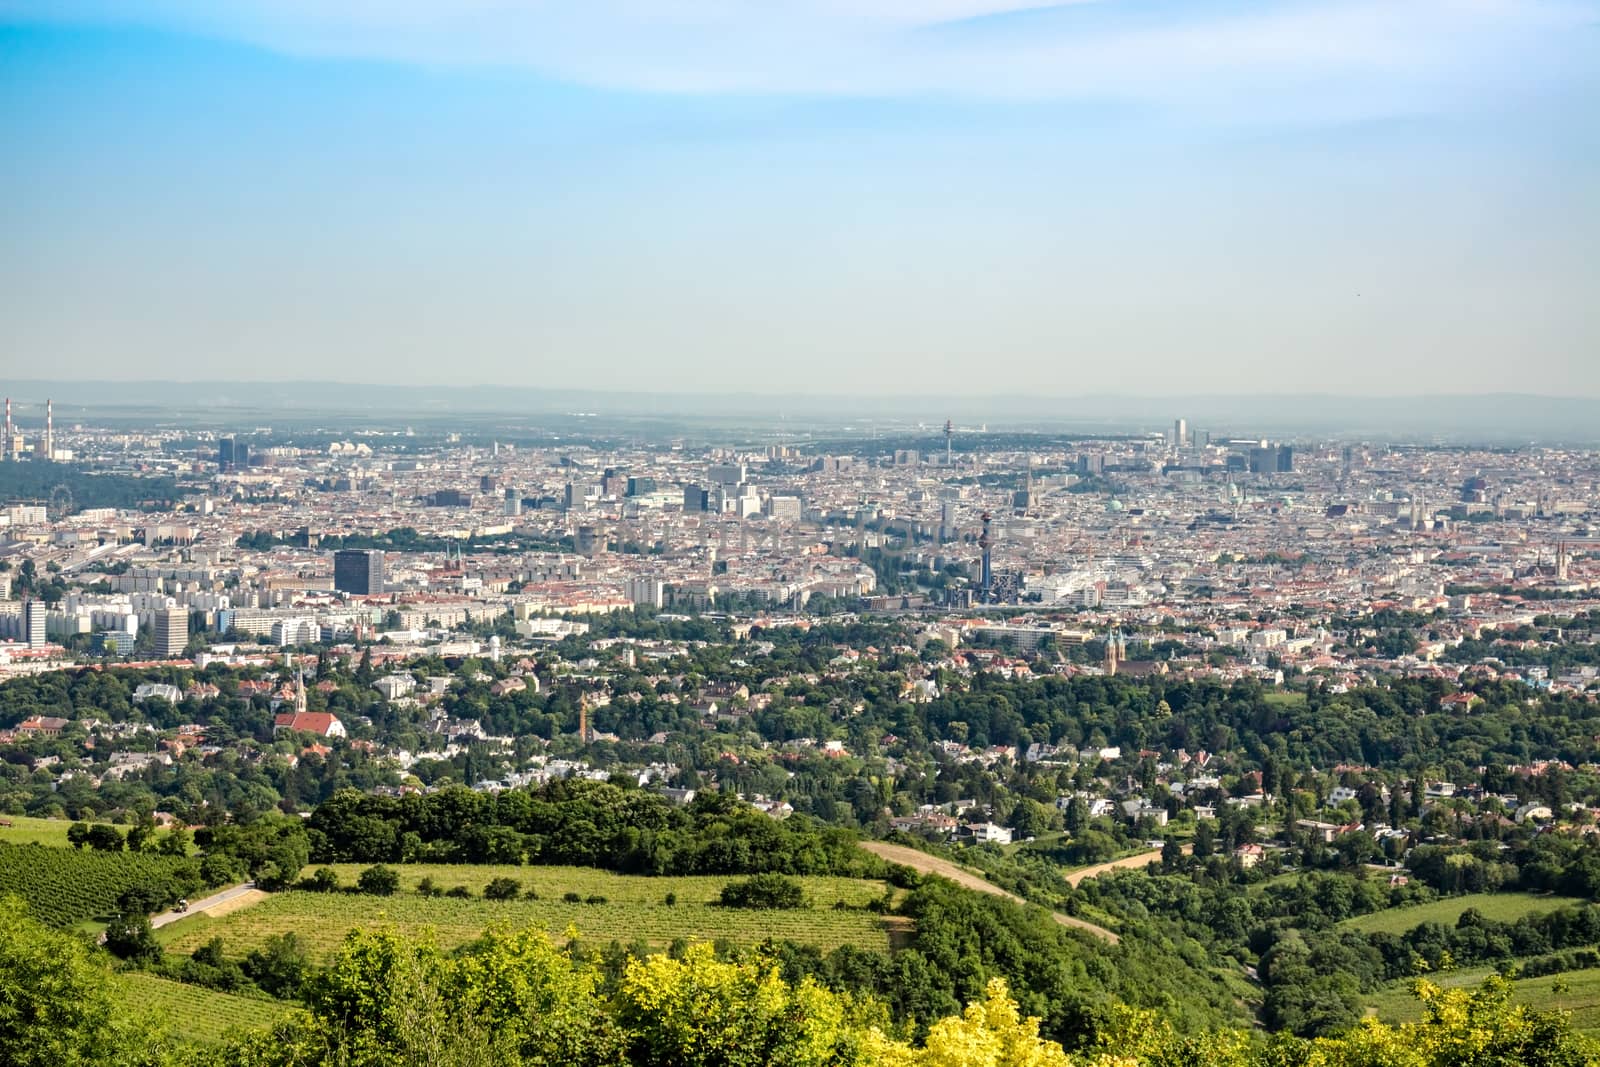 Vienna, the capital of Austria, seen from Kahlenberg a mountain to the north of the city